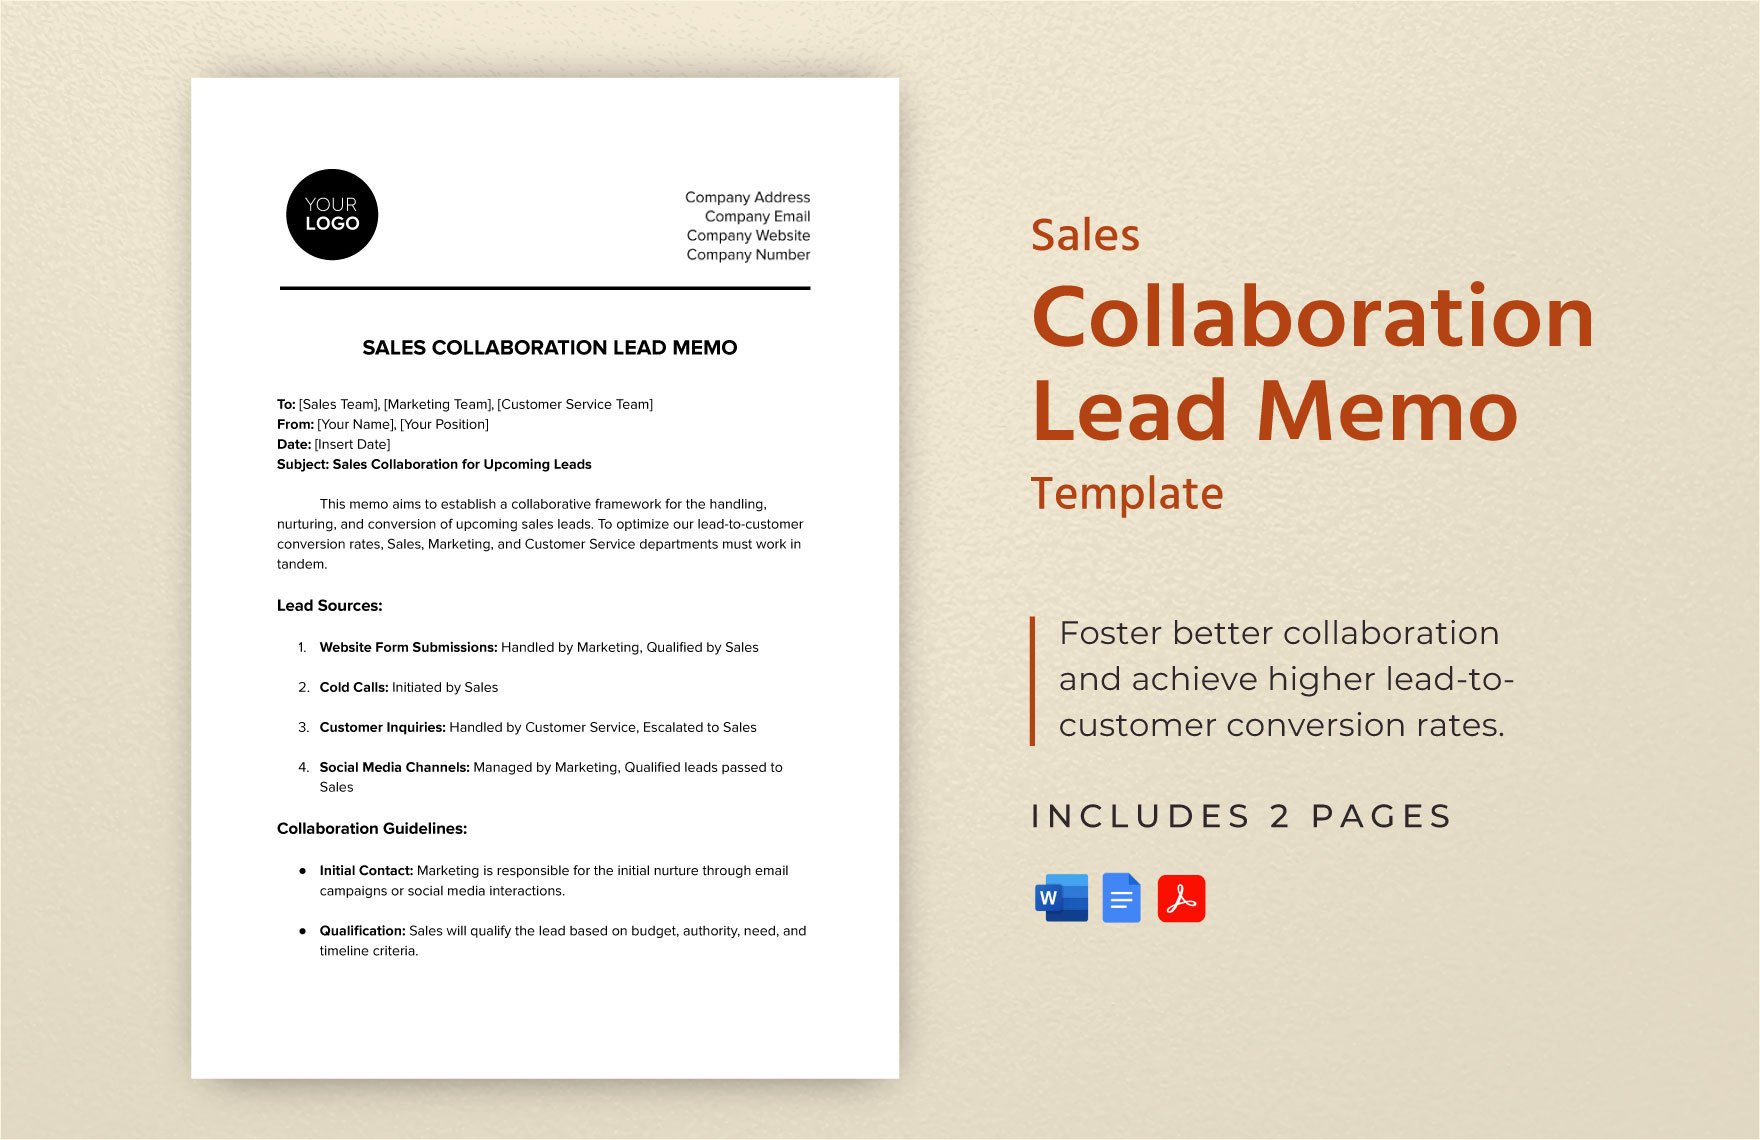 Sales Collaboration Lead Memo Template in Word, Google Docs, PDF